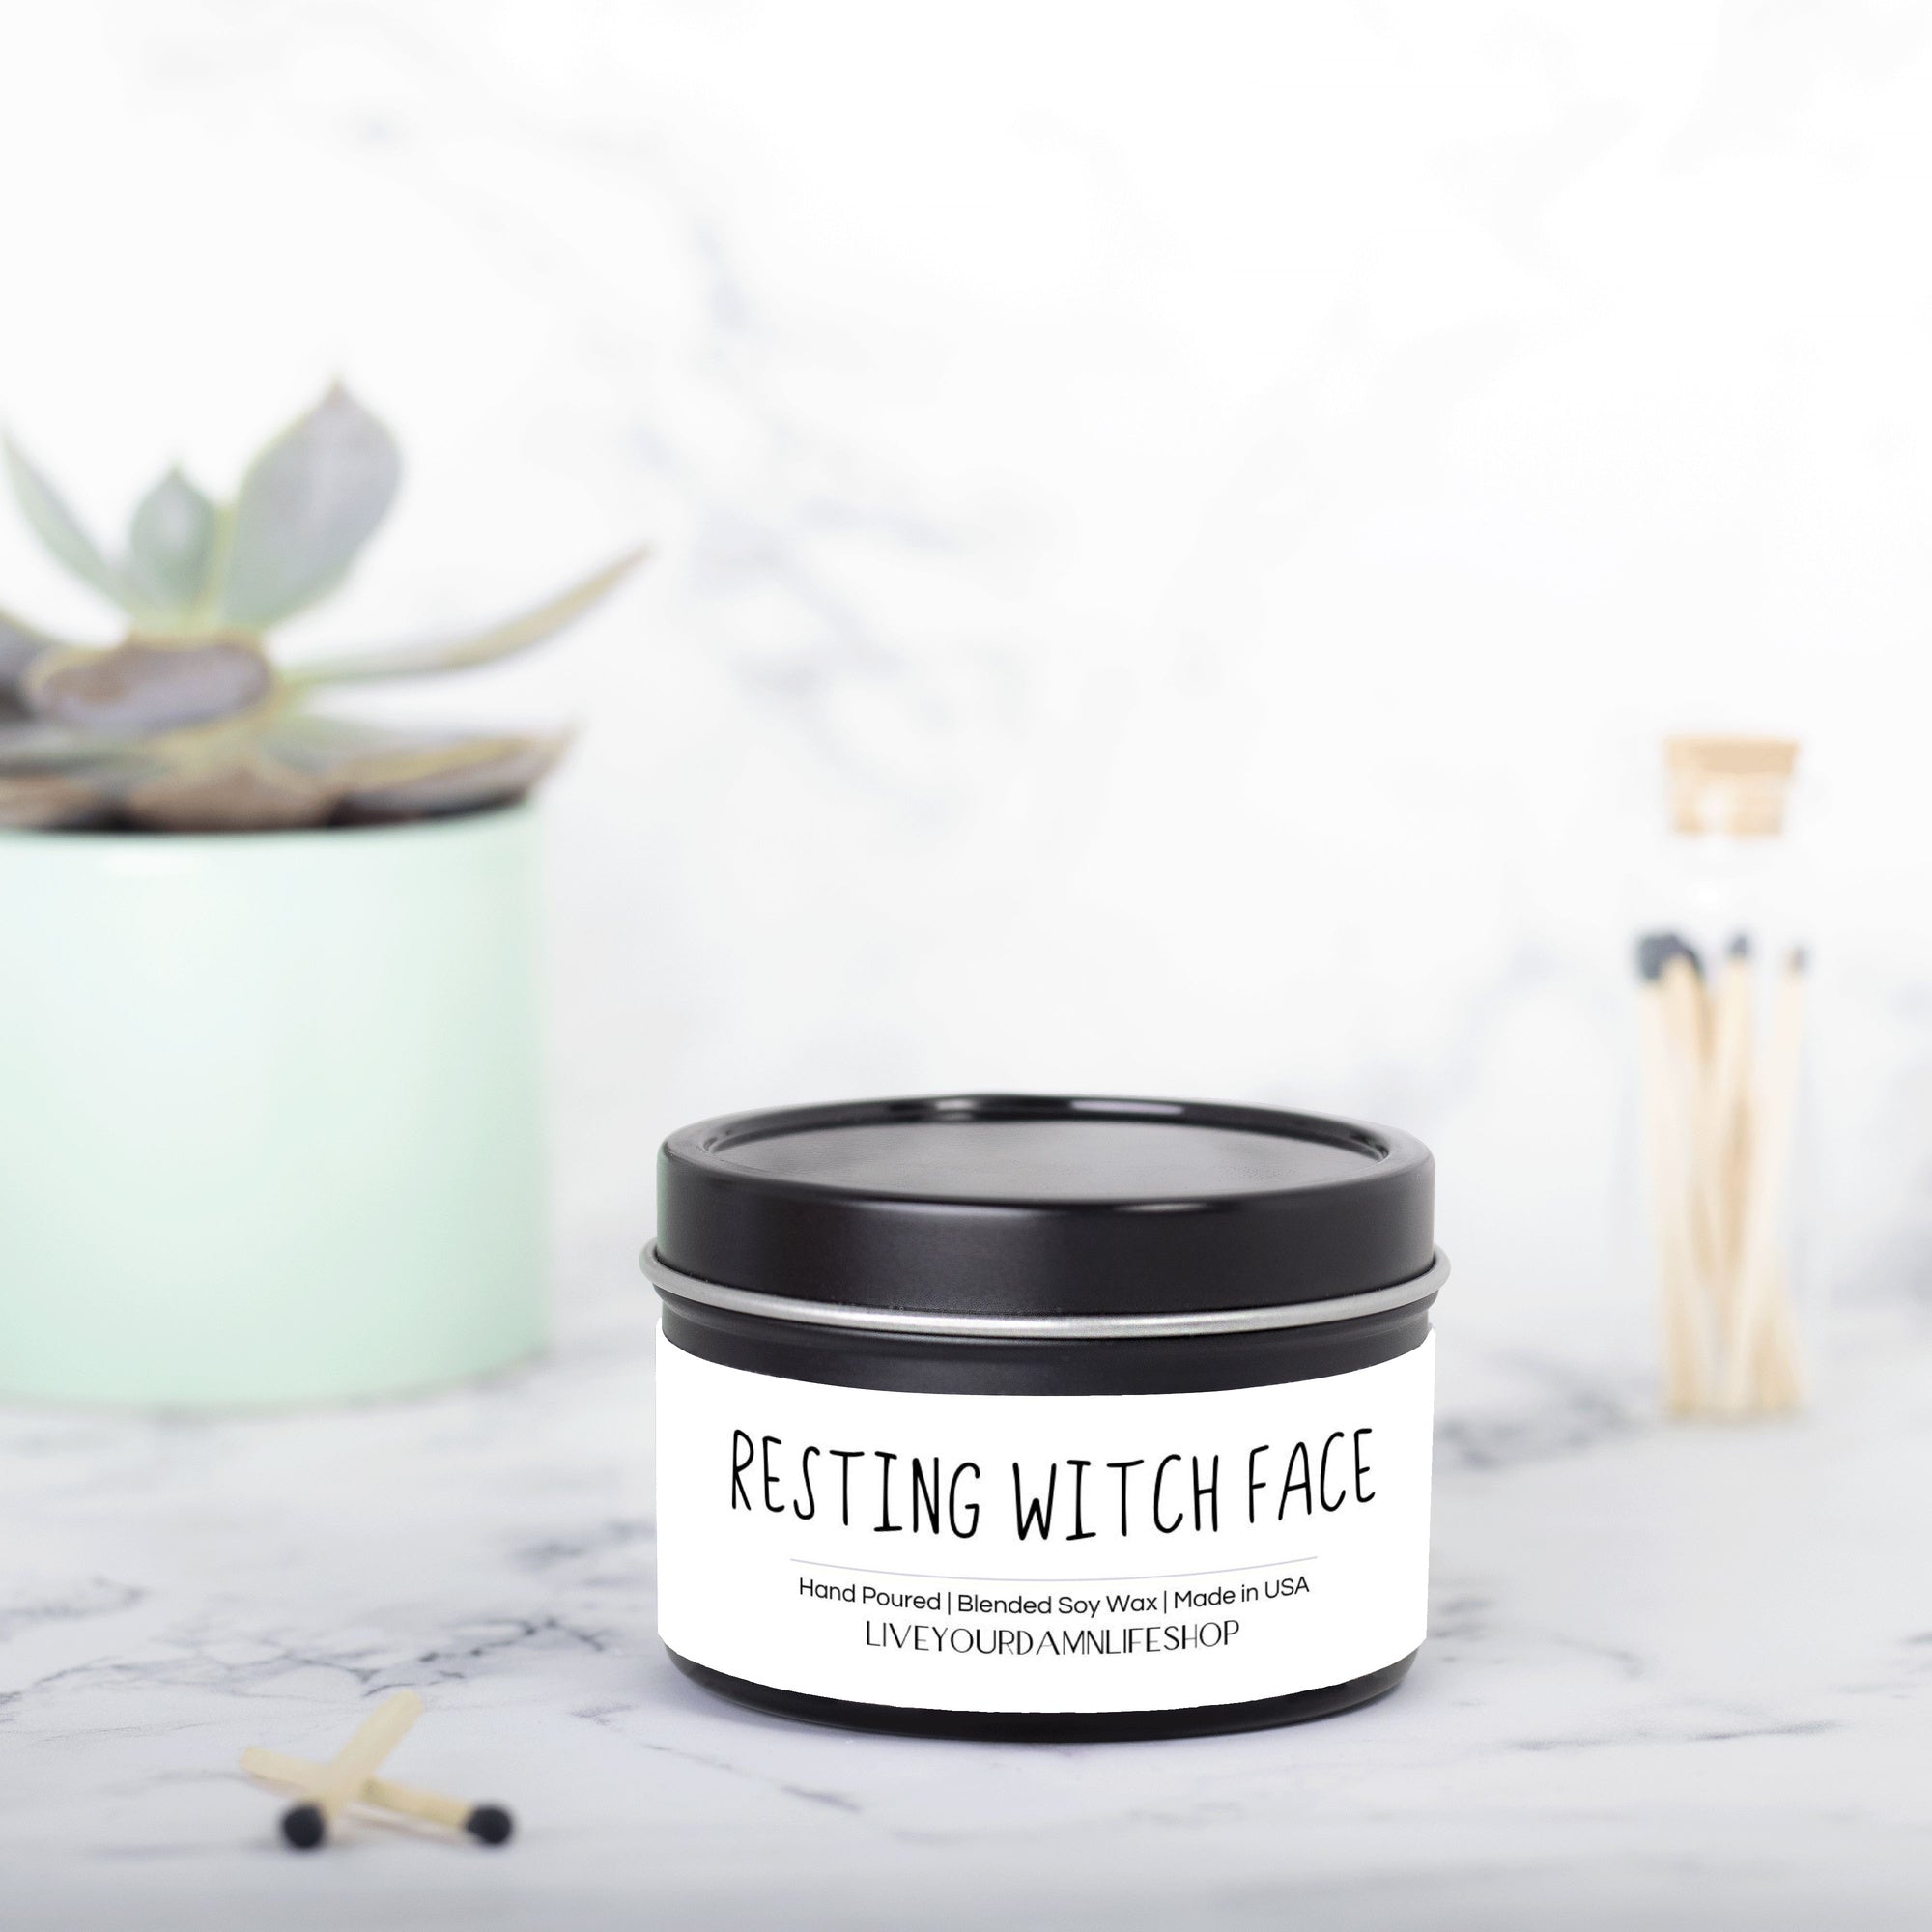 Resting Witch Face Candle Tin 4oz